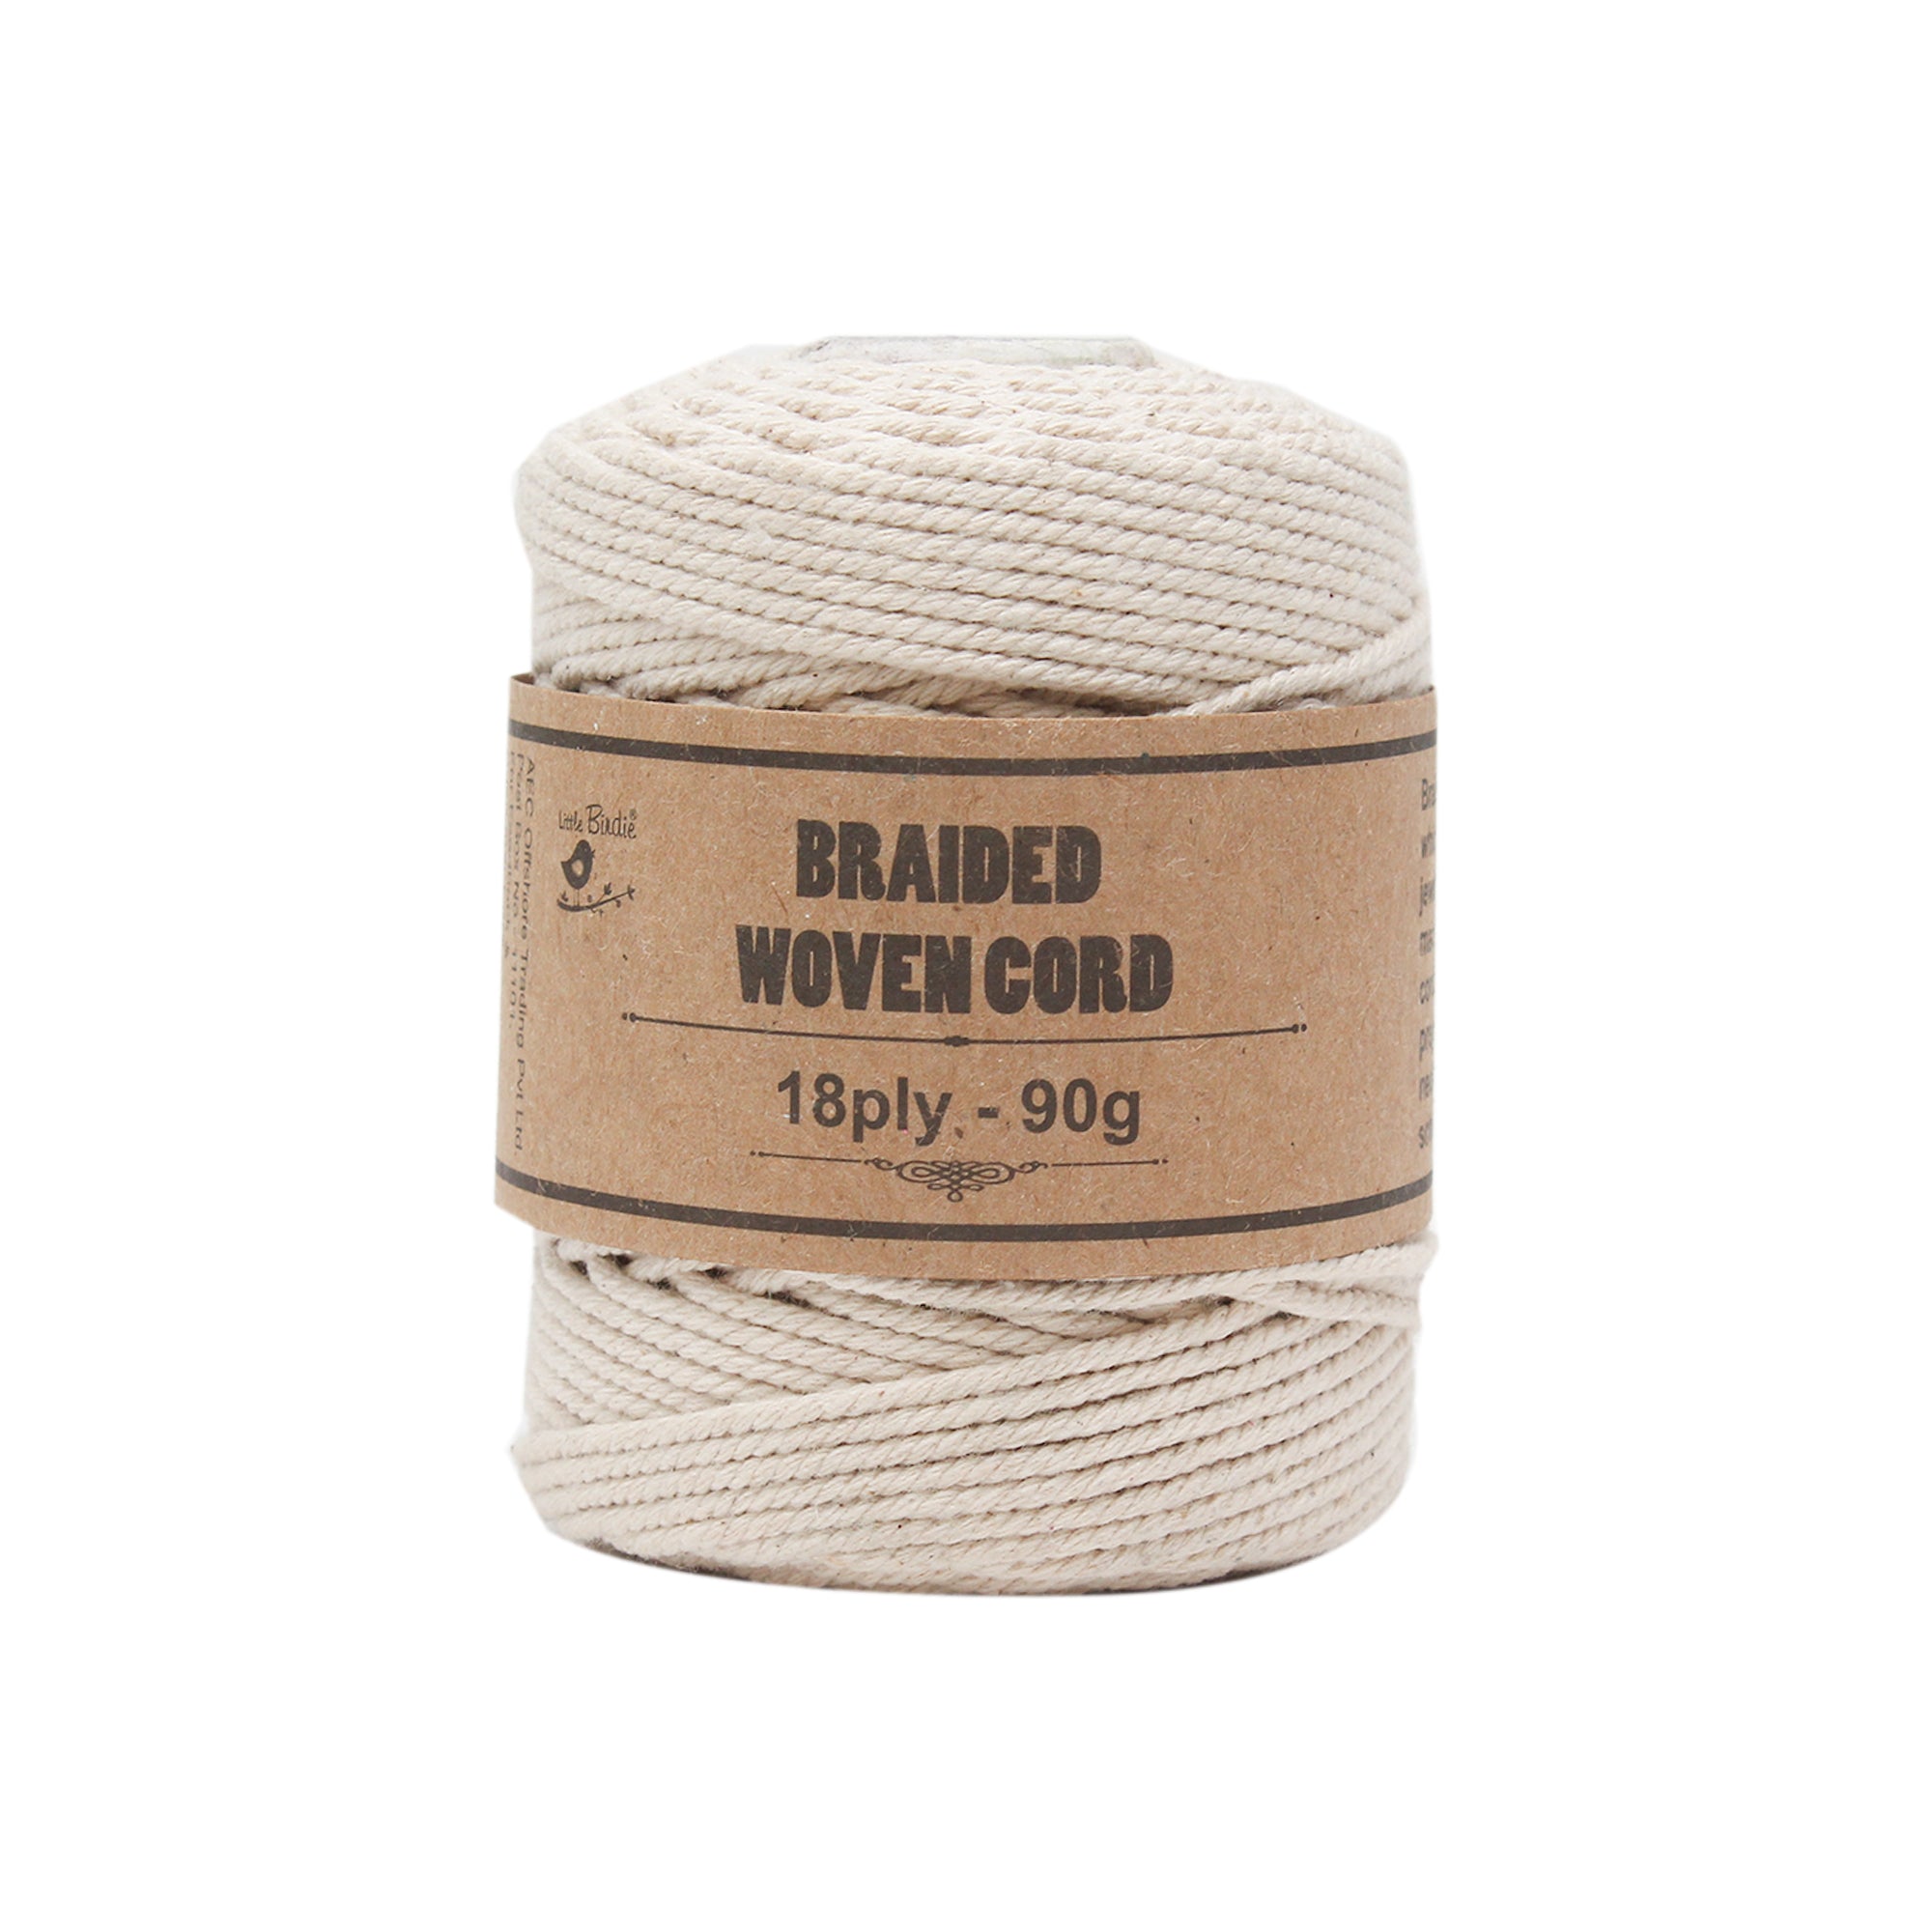 Braided Woven Cord 18 Ply, 90gm, 1Roll